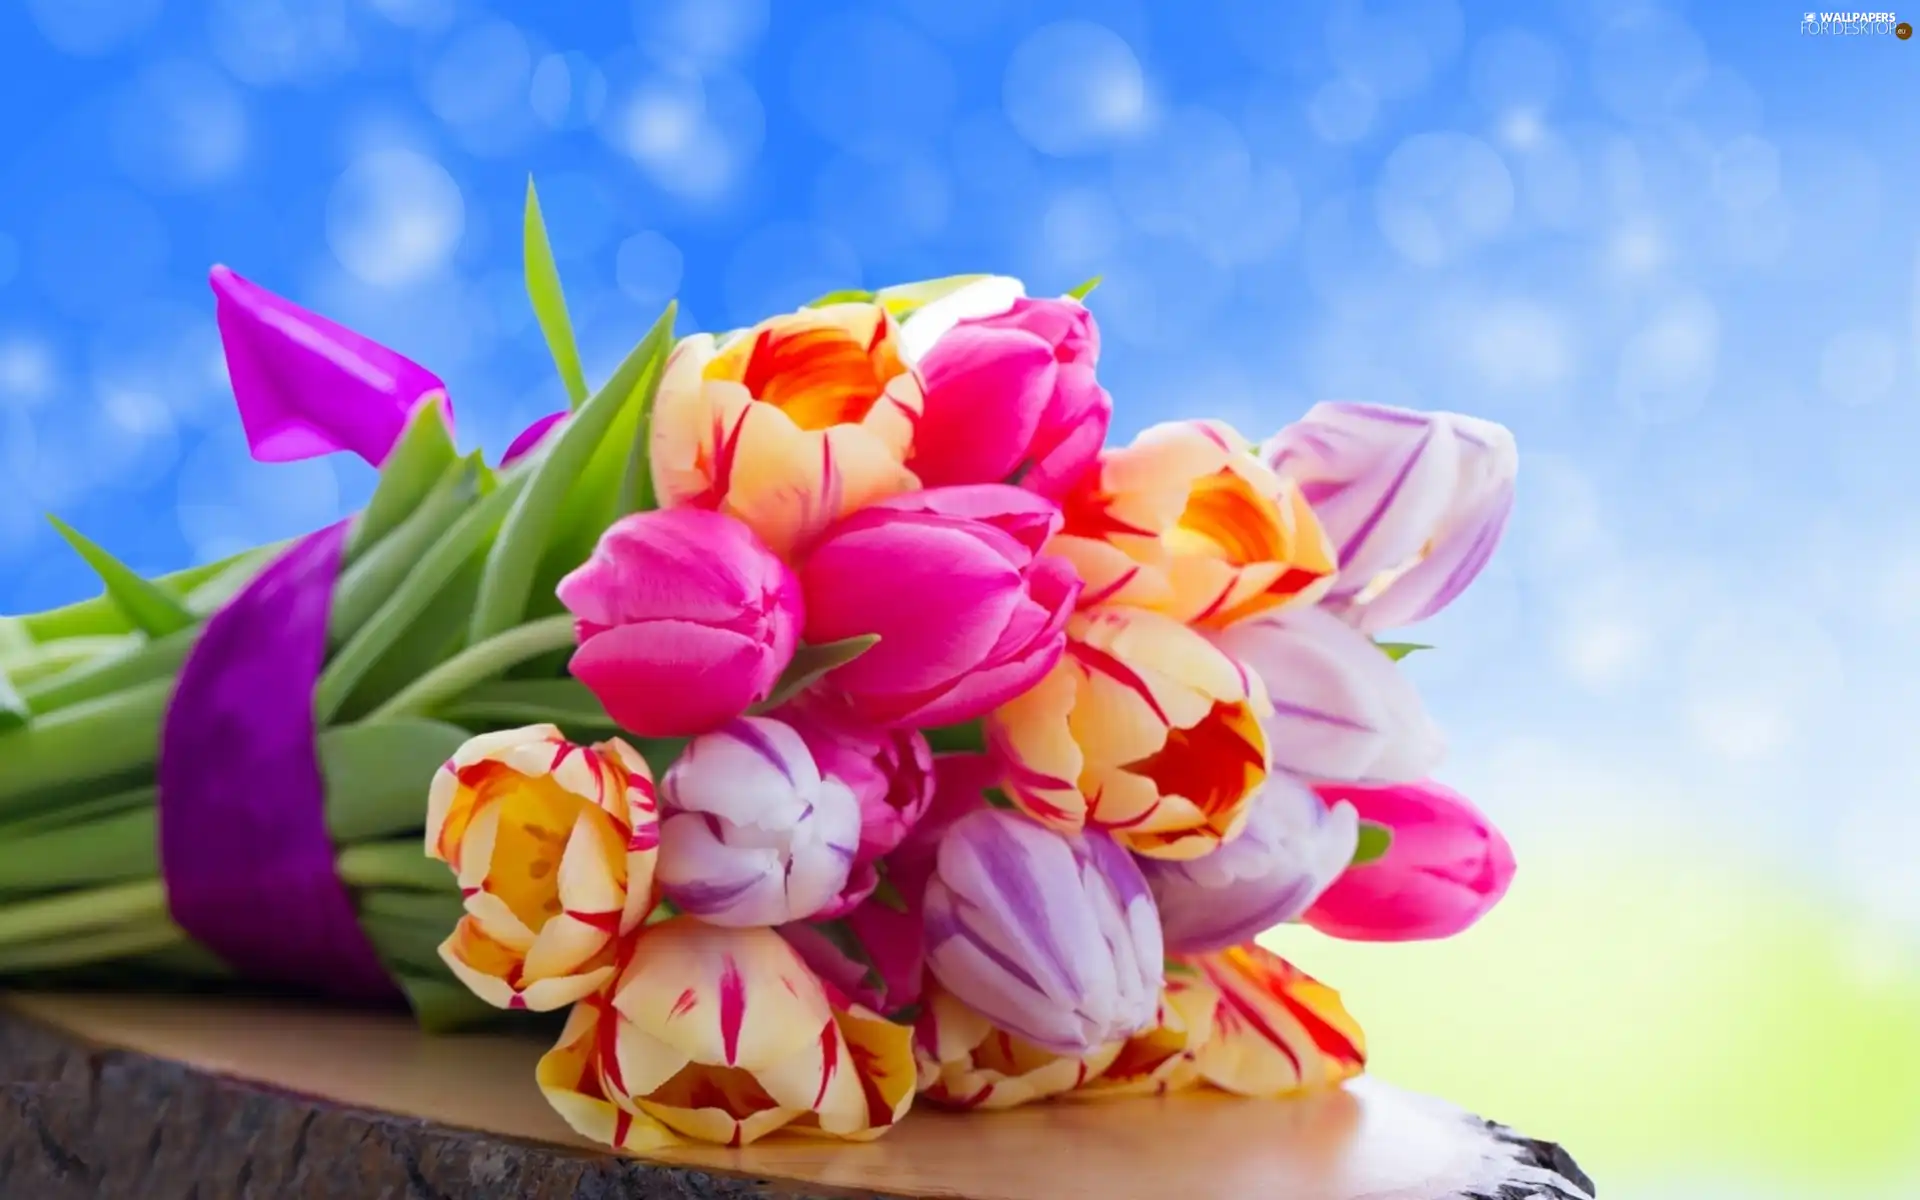 tulips, bouquet, Colorful